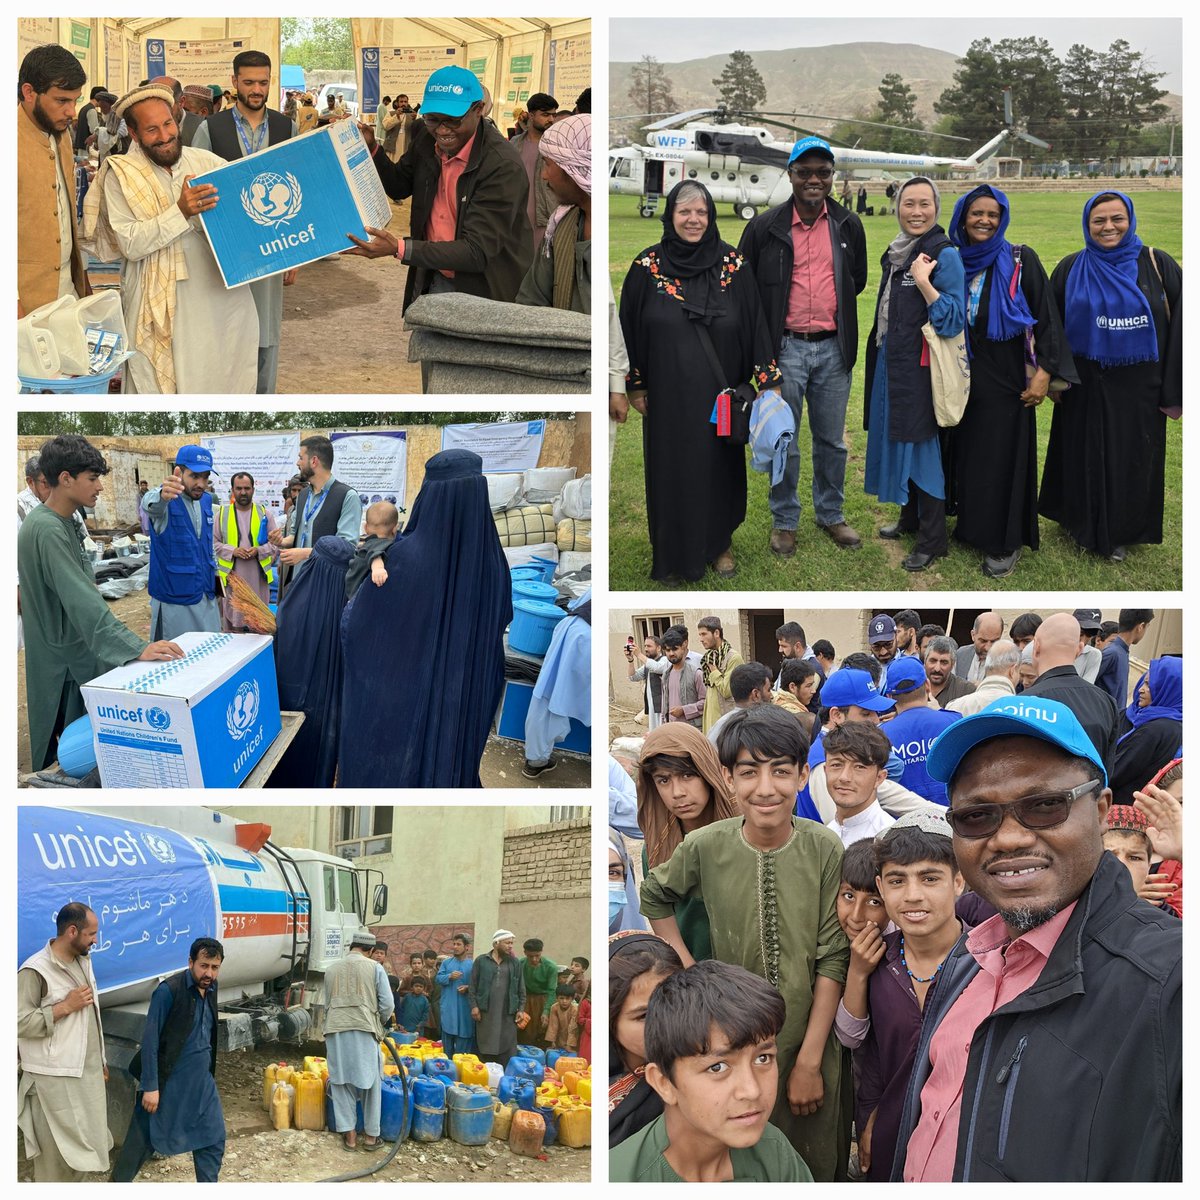 Today's visit to Baghlan province, Northern Afghanistan, alongside @unafghanistan, offered a sobering glimpse into the aftermath of recent flash floods. @UNICEFAfg & partners are providing vital support, incl. safe water, supplies, cash & psychosocial support. Ugent needs remain.